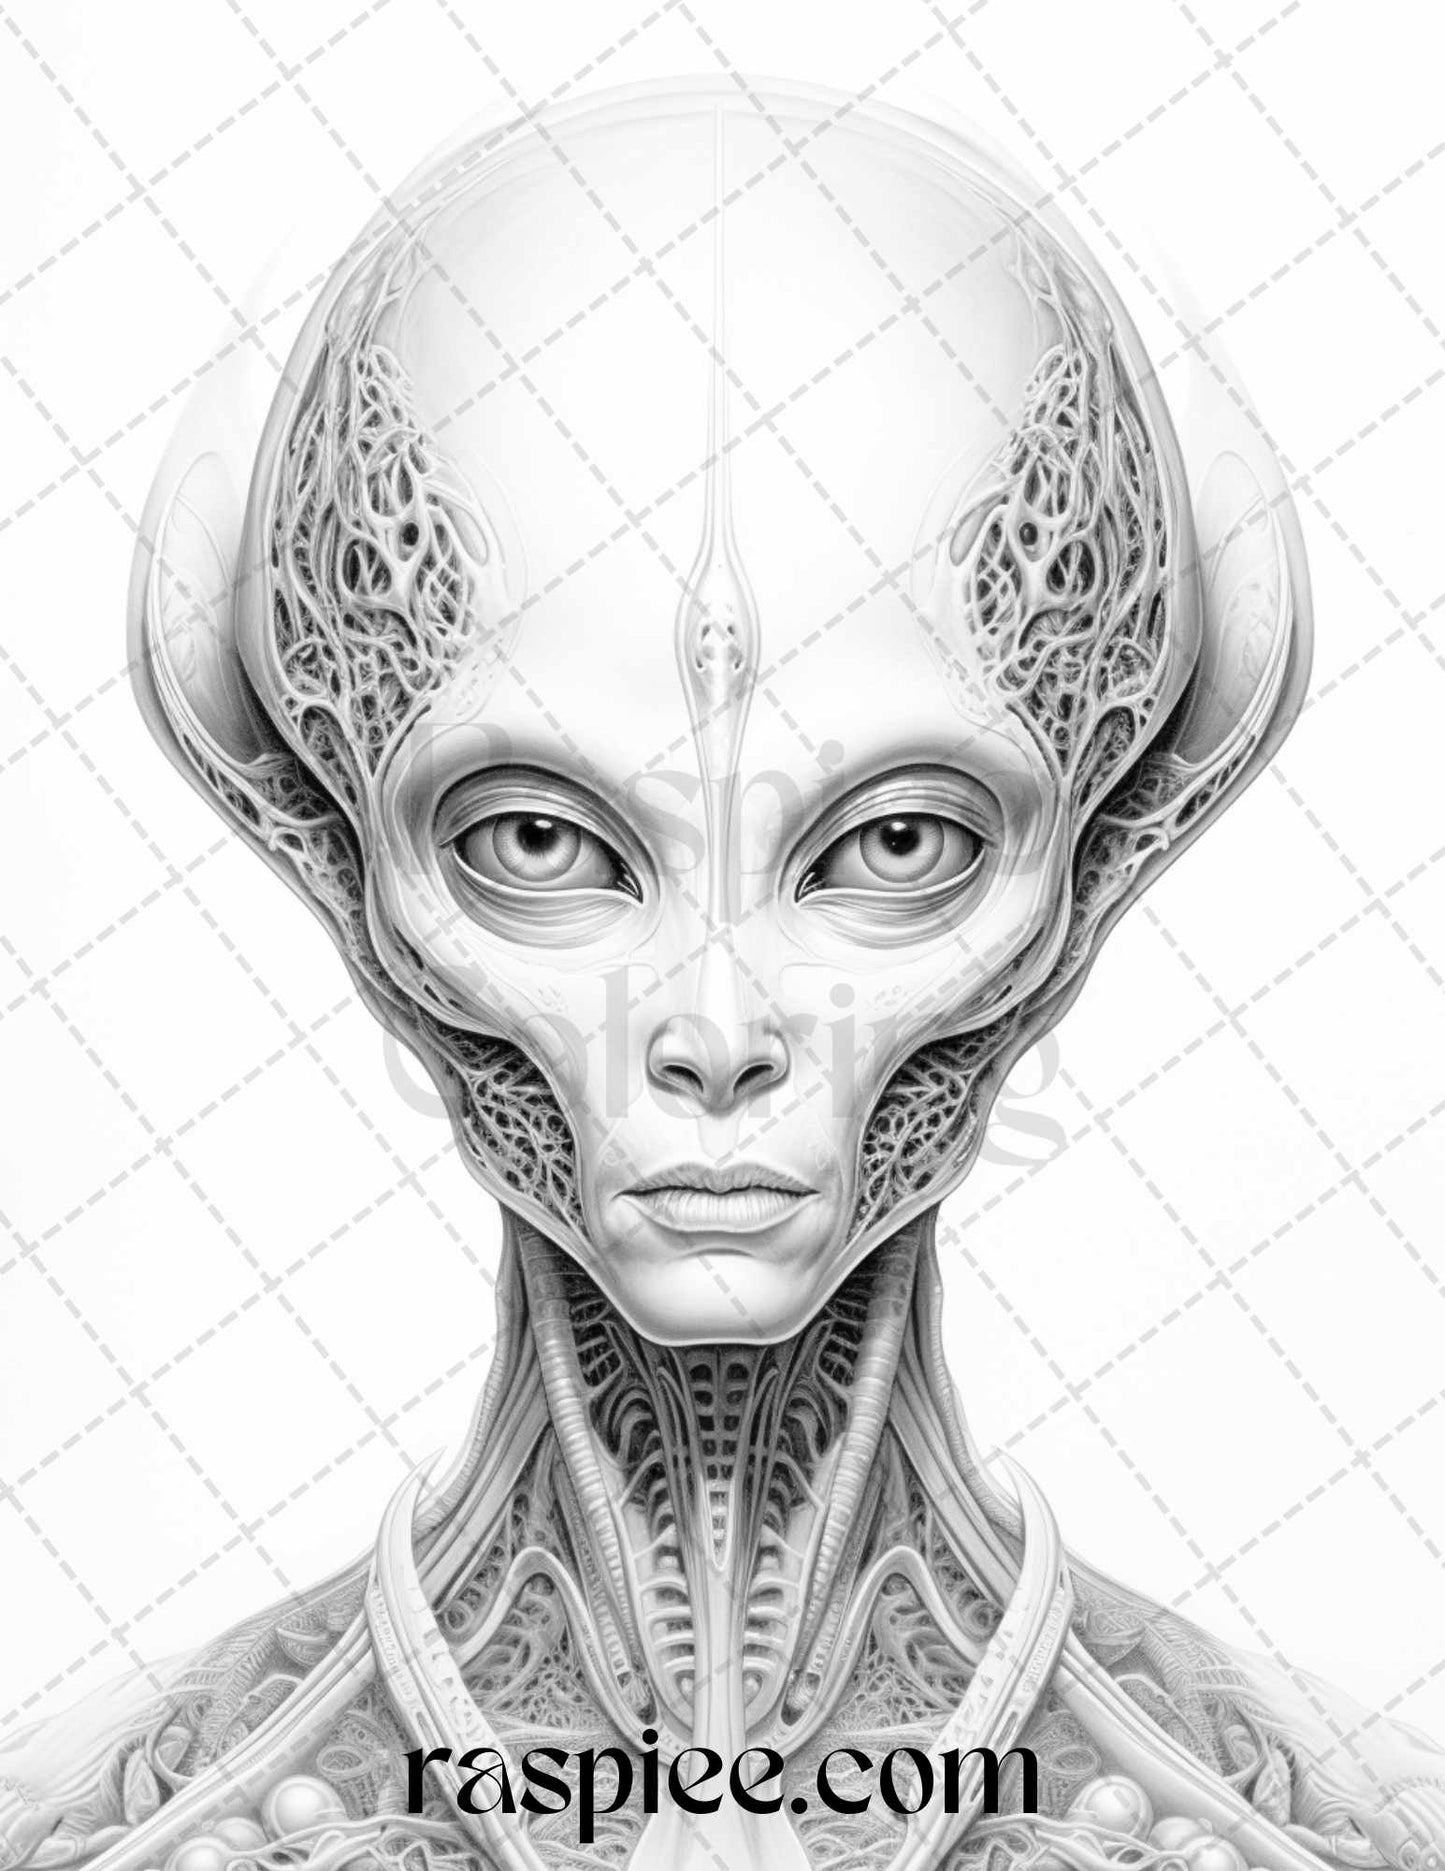 65 Alien Portrait Grayscale Coloring Pages for Adults, Printable PDF File Instant Download